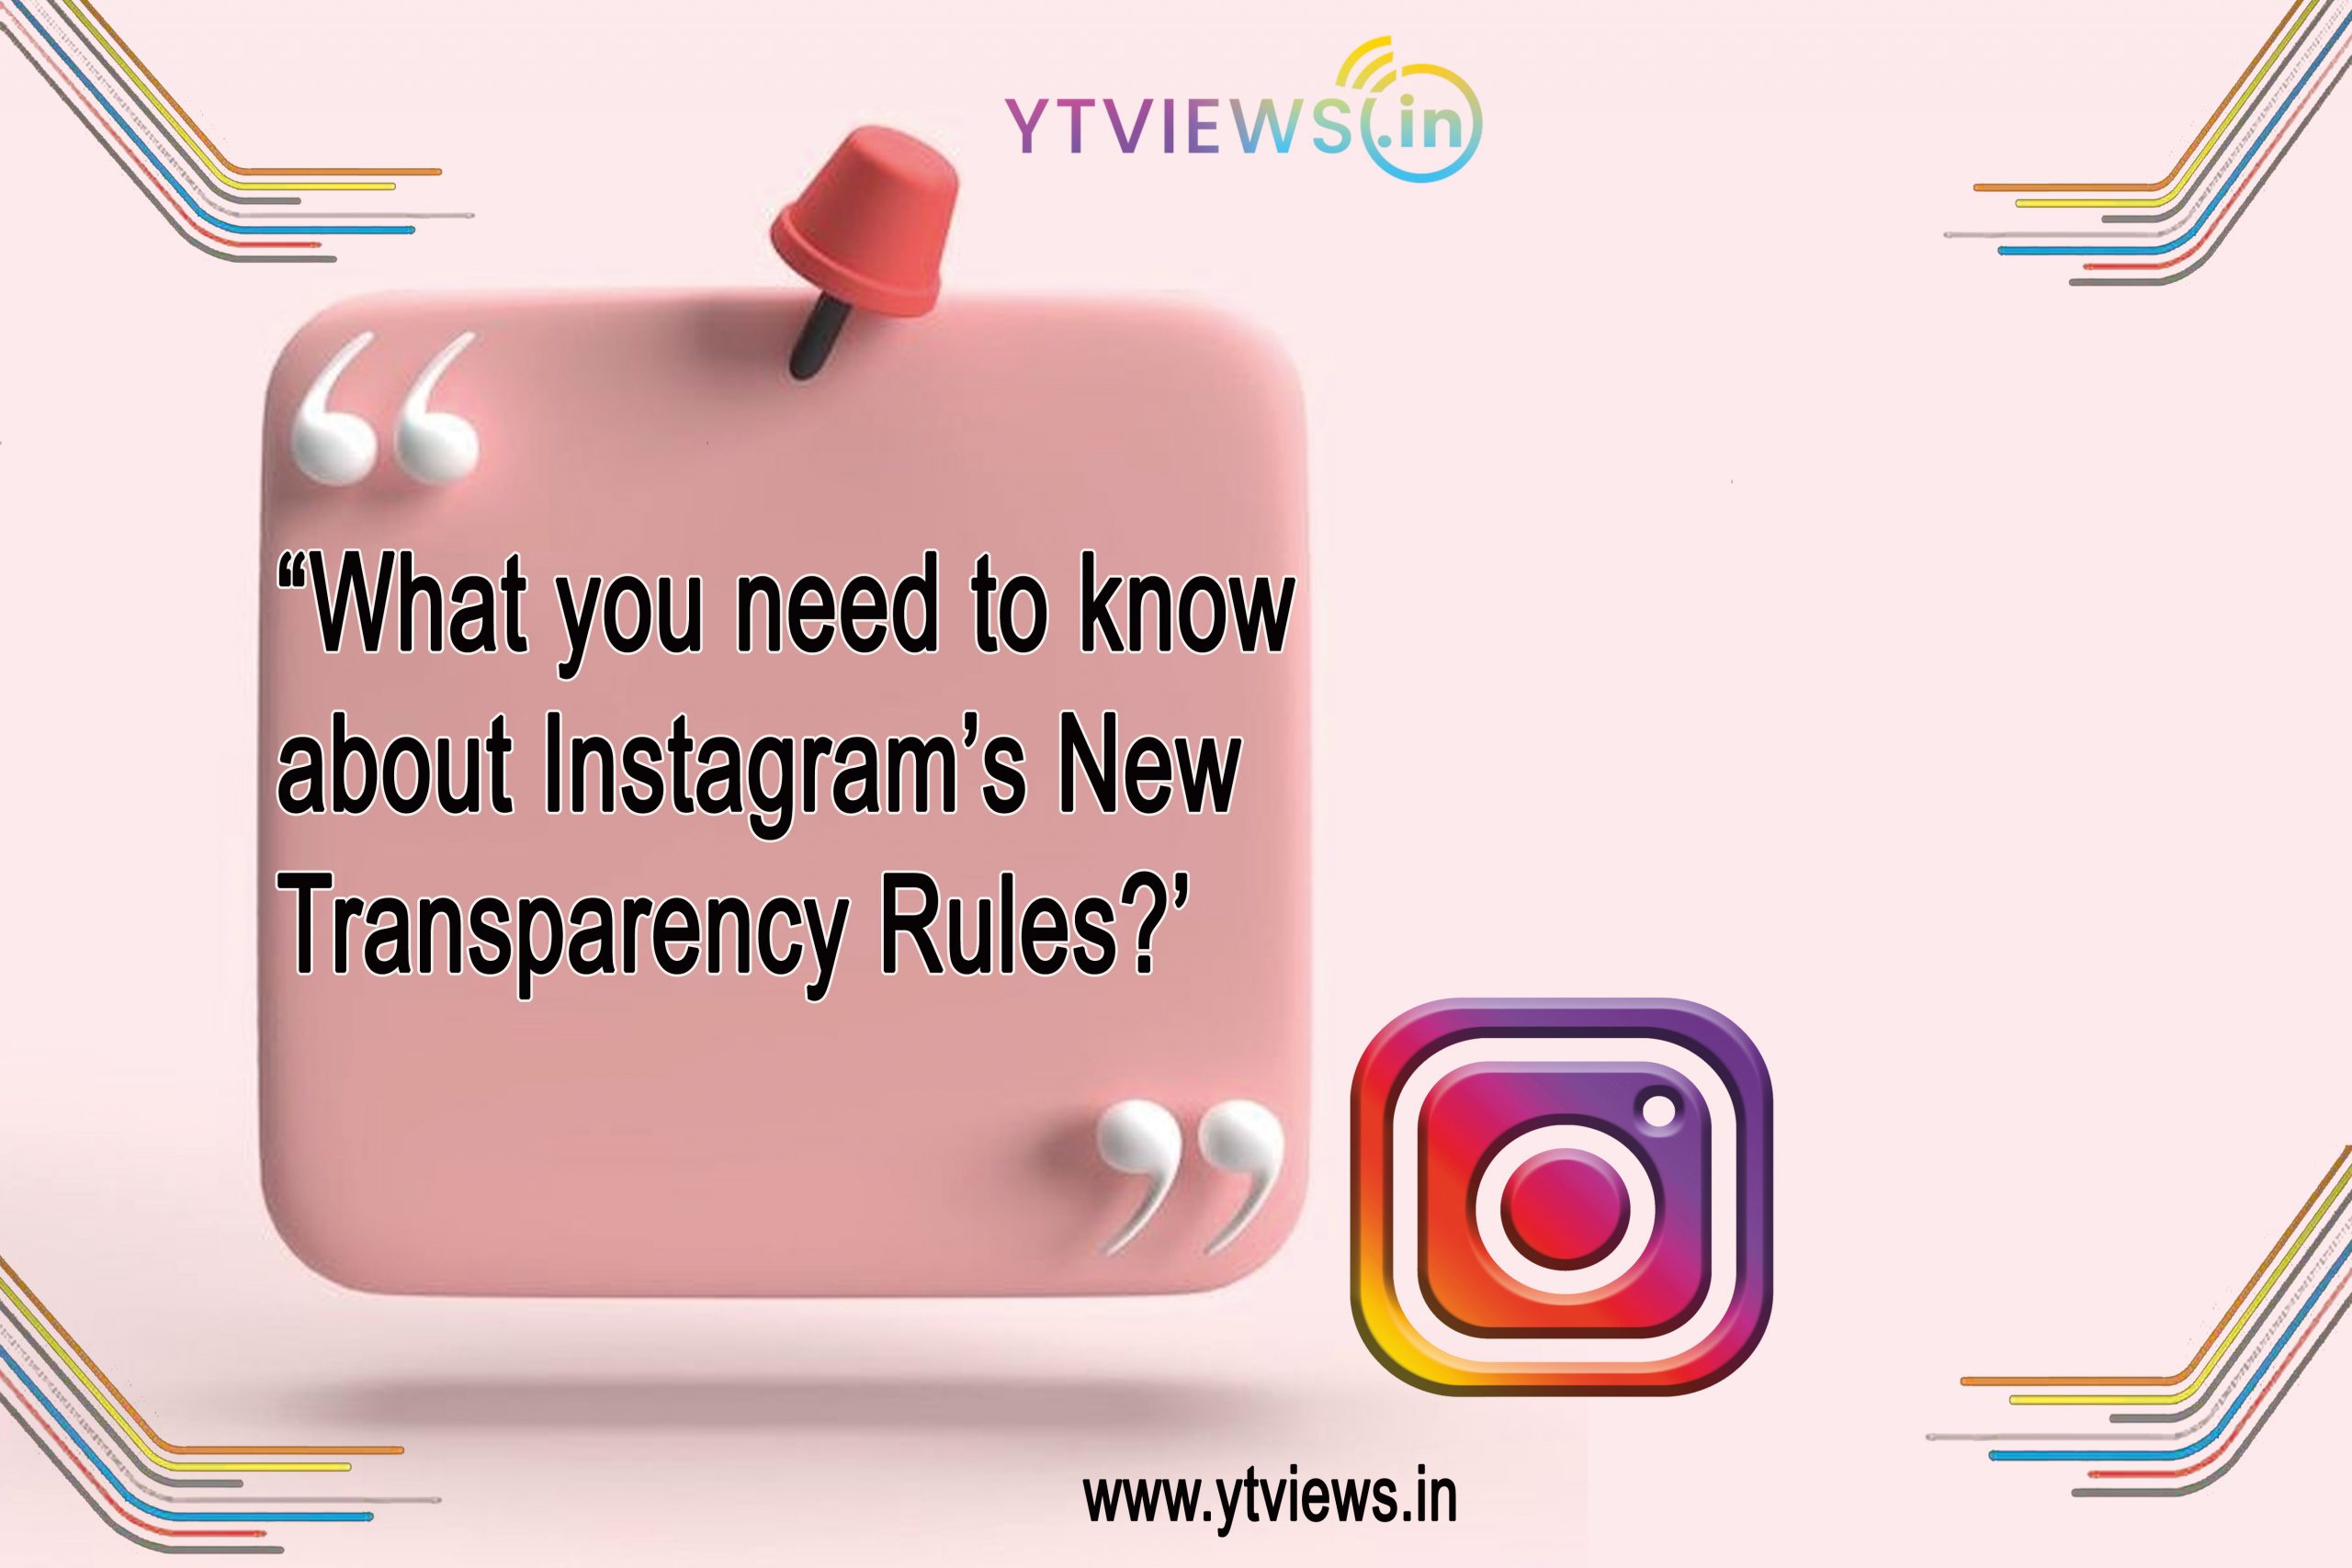 “What You Need to Know About Instagram’s New Transparency Rules?”